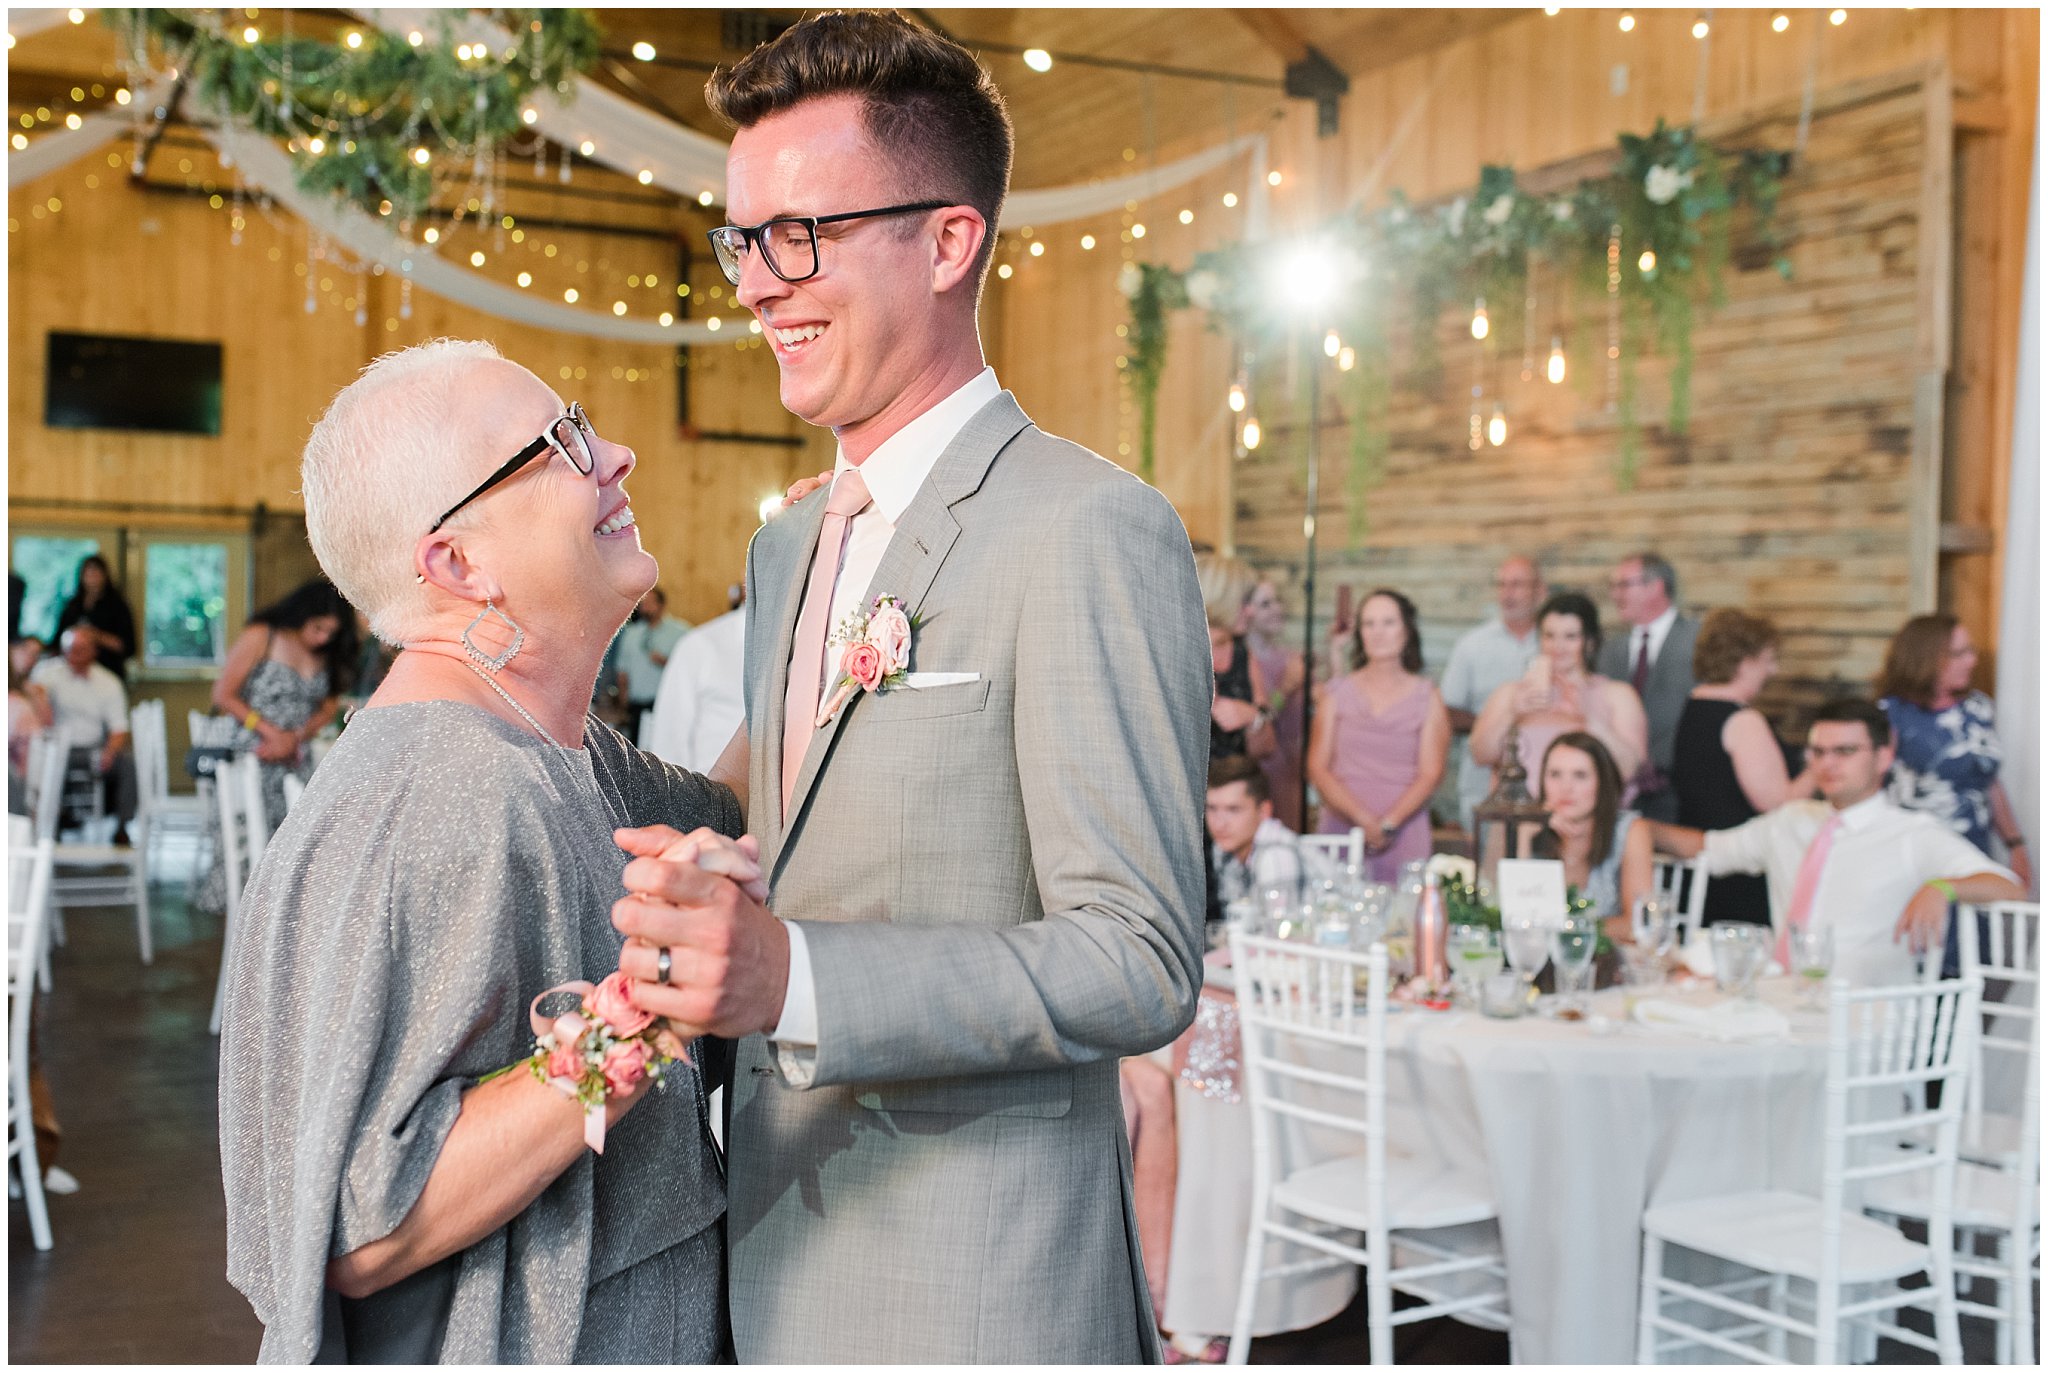 Mother son dance in barn | Oak Hills Utah Dusty Rose and Gray Summer Wedding | Jessie and Dallin Photography